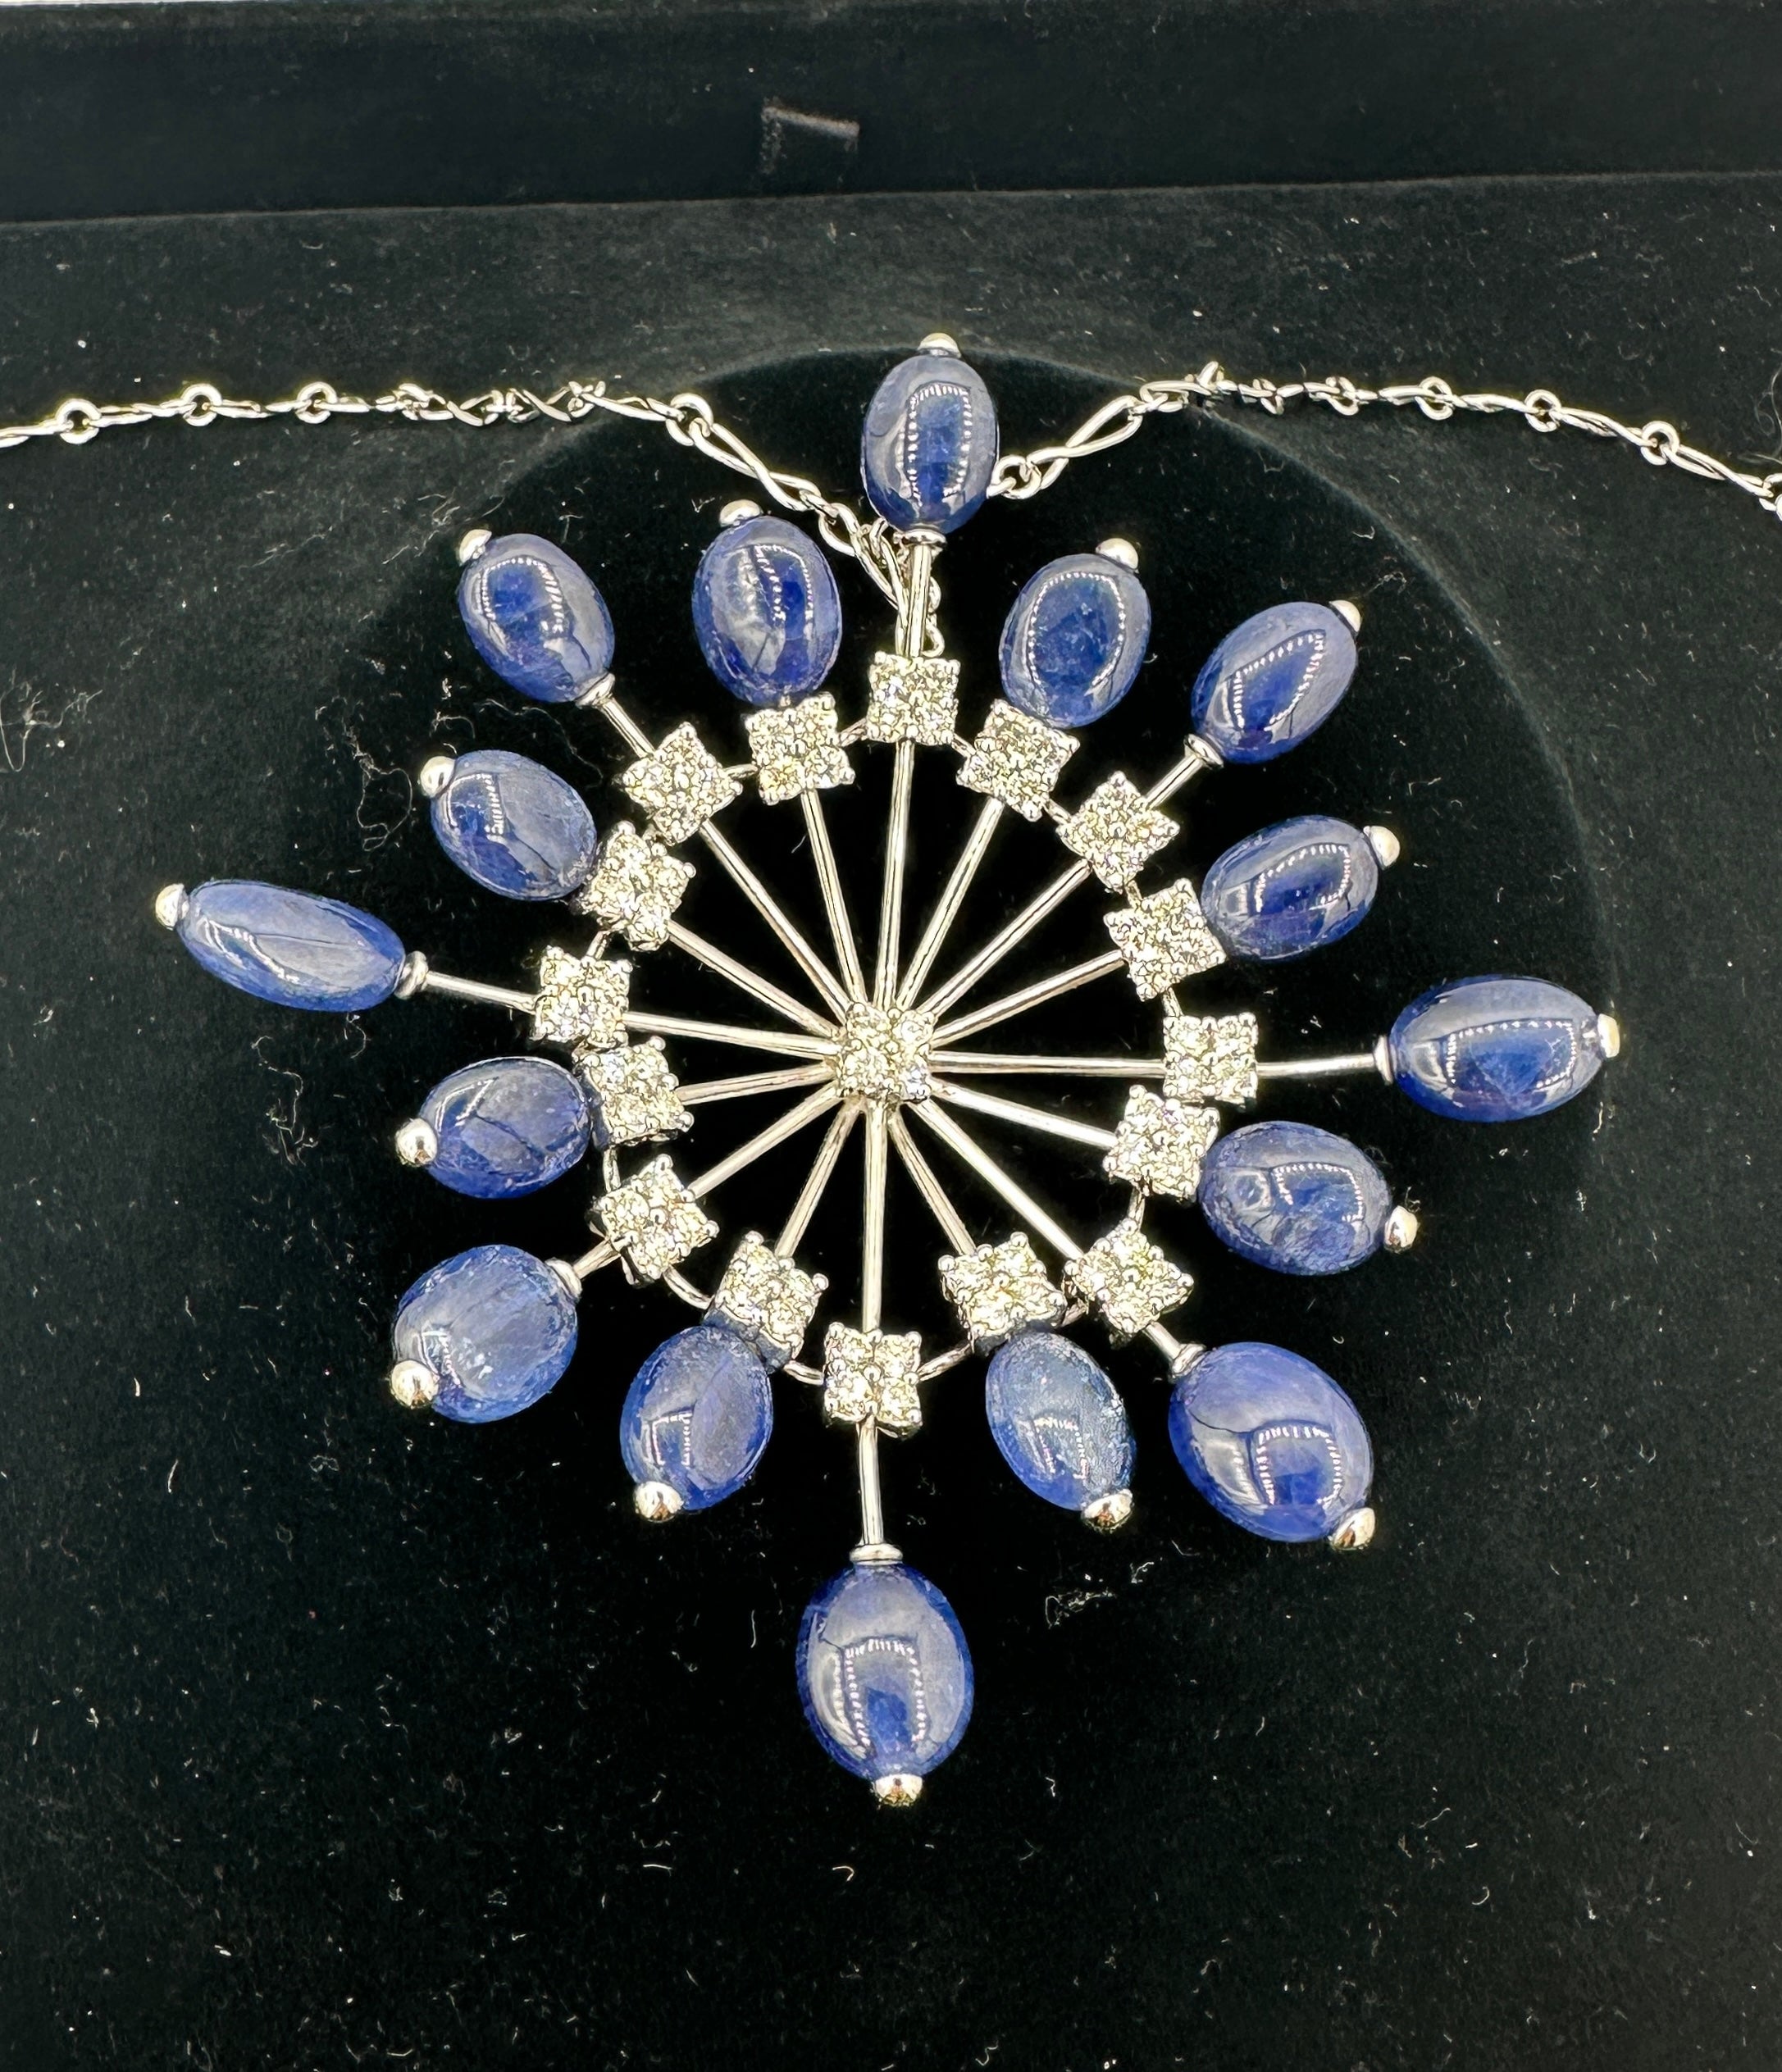 Zydo 16 Sapphire 68 Diamond Pendant Necklace 3.25 Inches 18 Karat White Gold In Excellent Condition For Sale In New York, NY